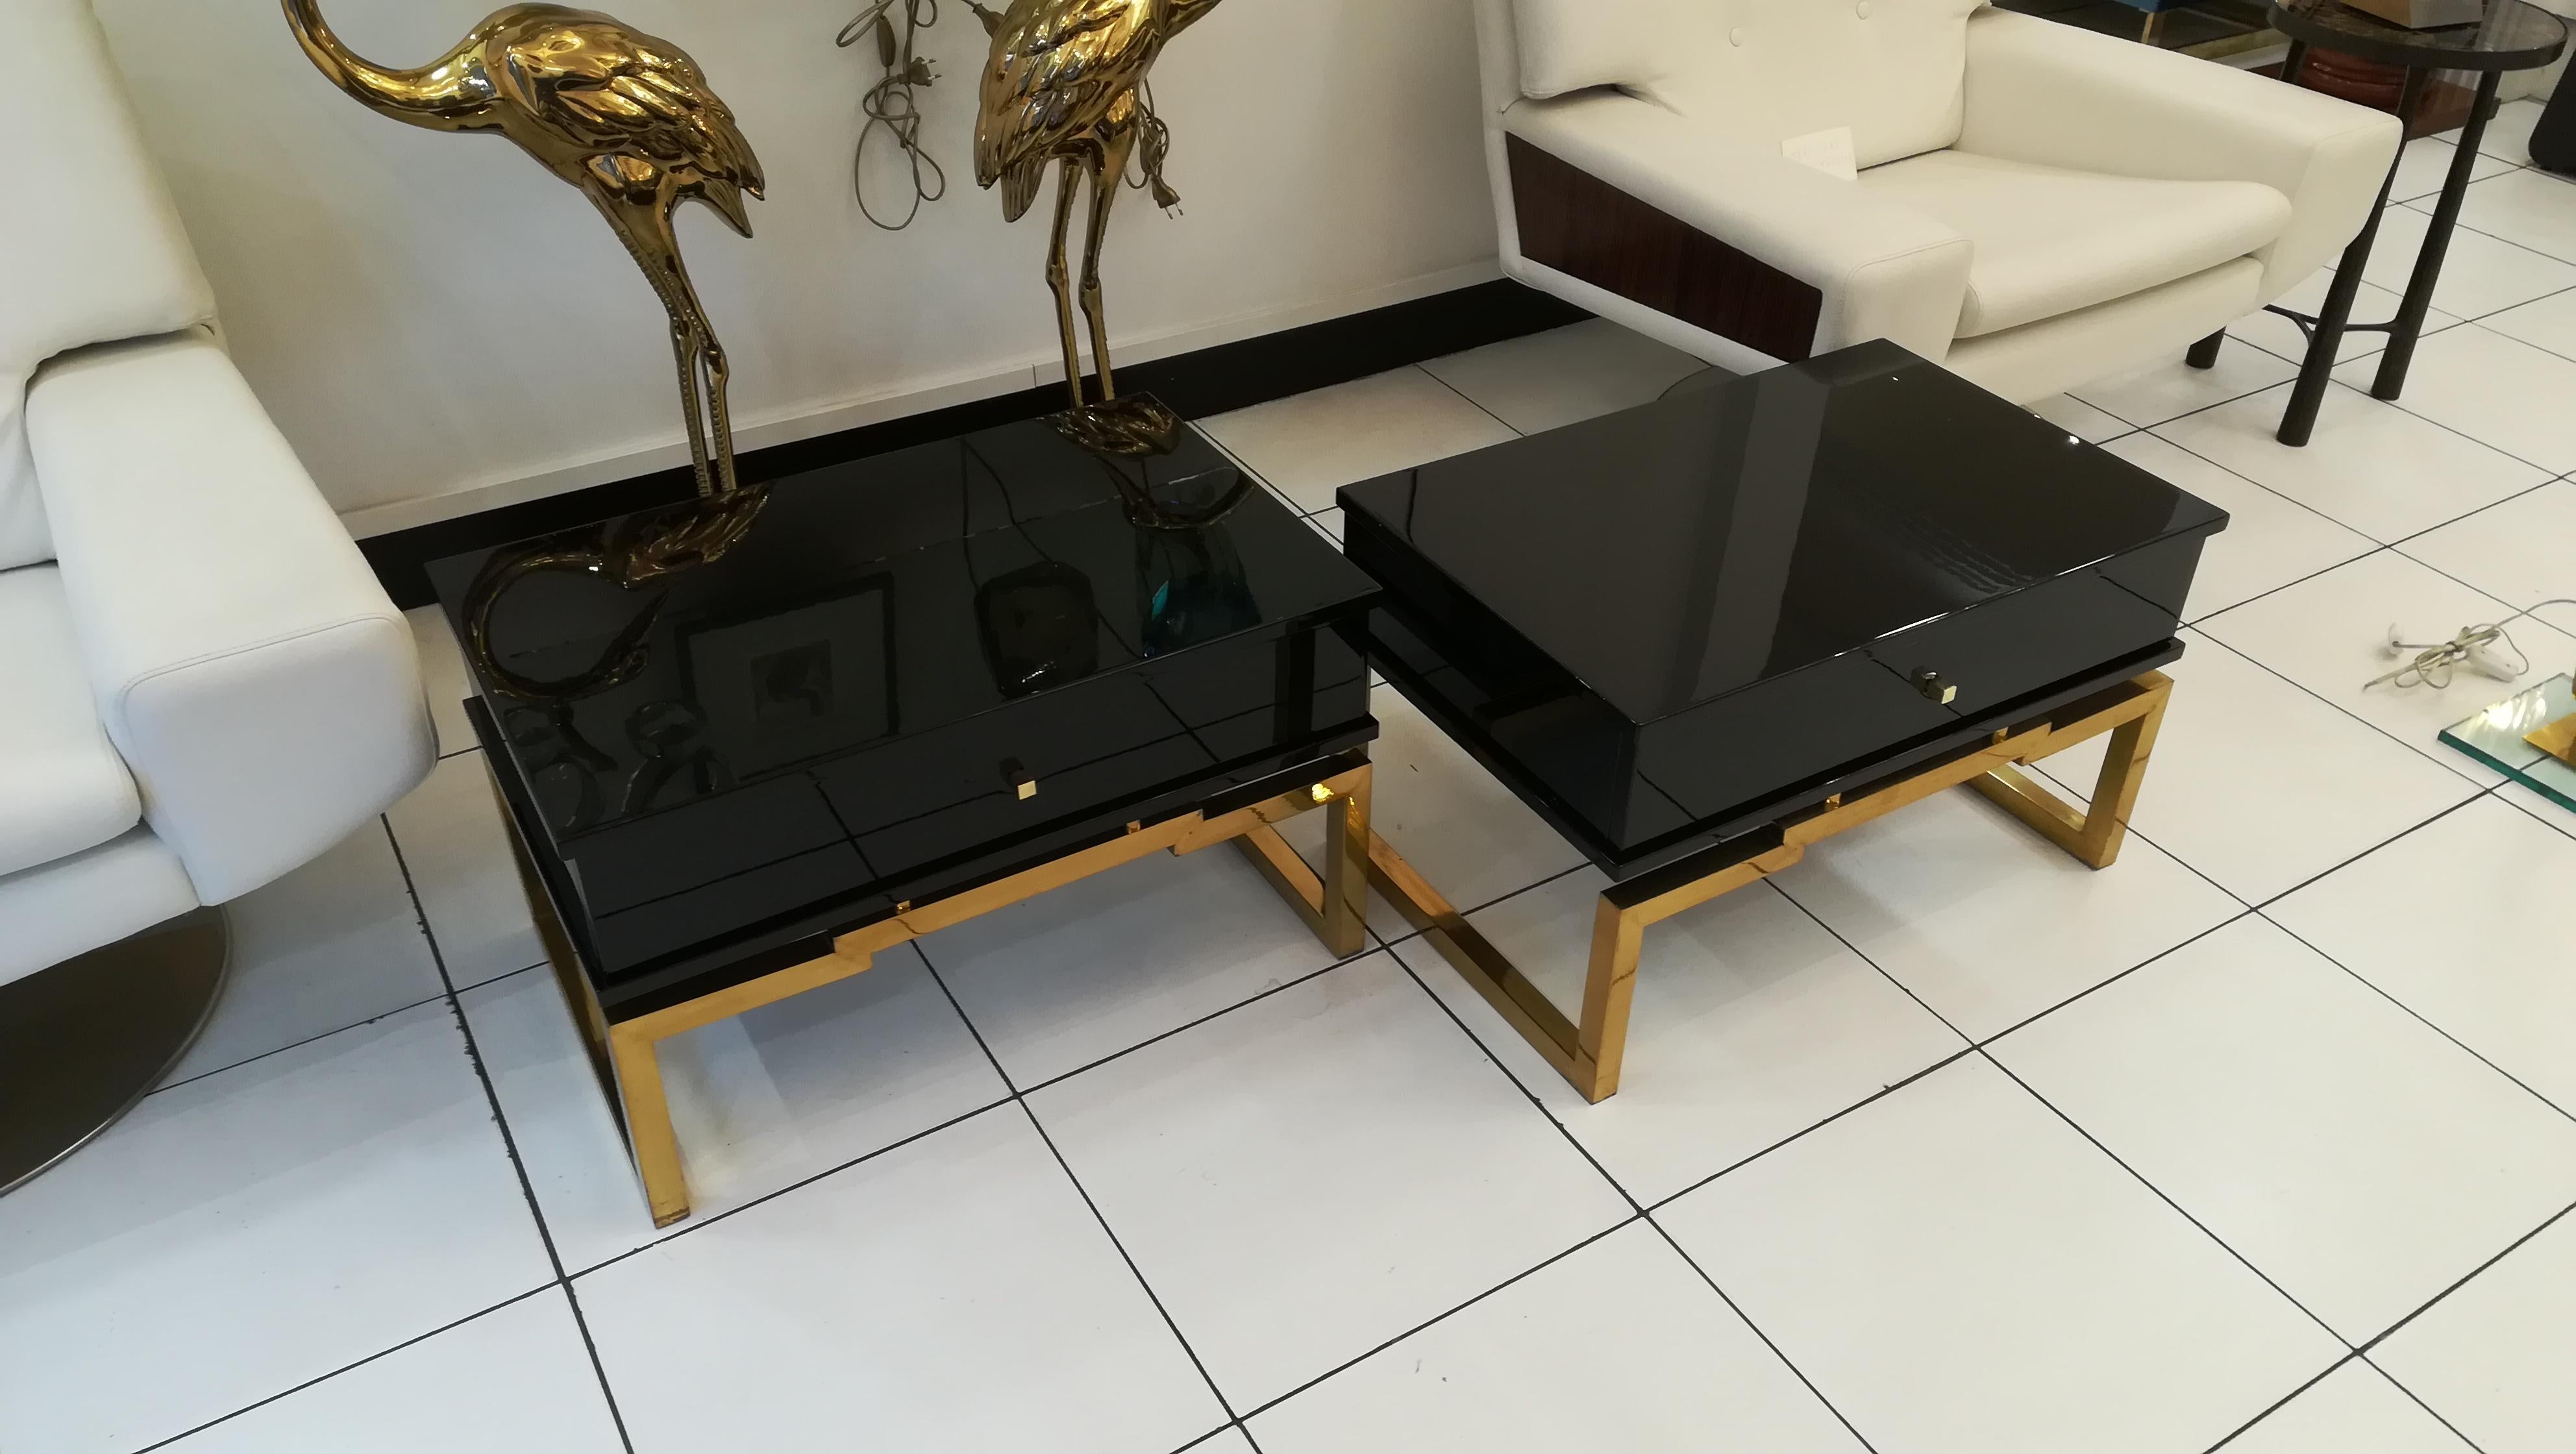 Pair of bedsides or end tables in lacquered wood, brass feet, circa 1970.